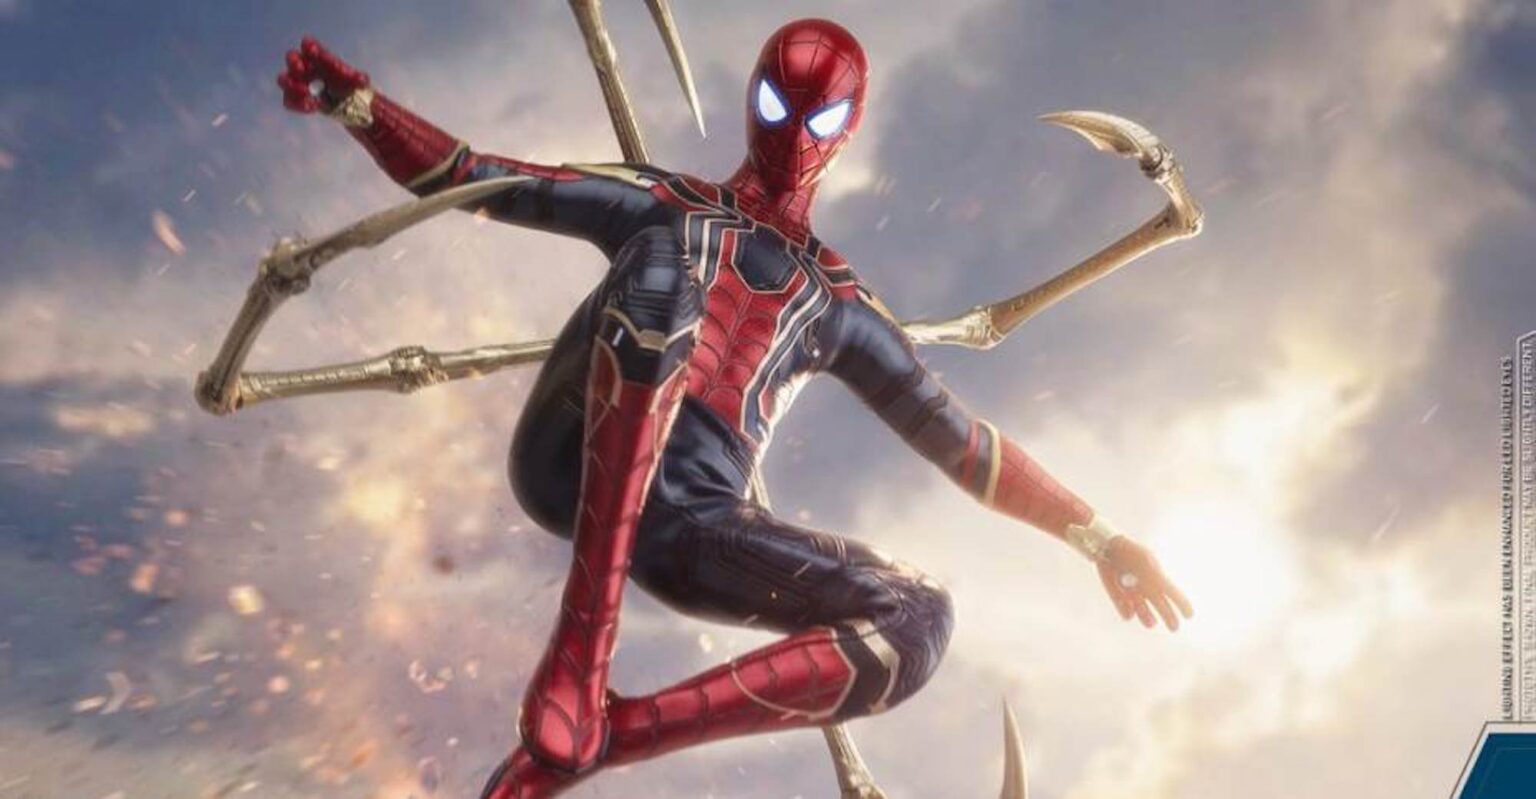 Is Tom Holland going from Spider-Man to Iron Spider in 'Spider-Man: No Way Home'? Look at these leaked images as Twitter reacts.